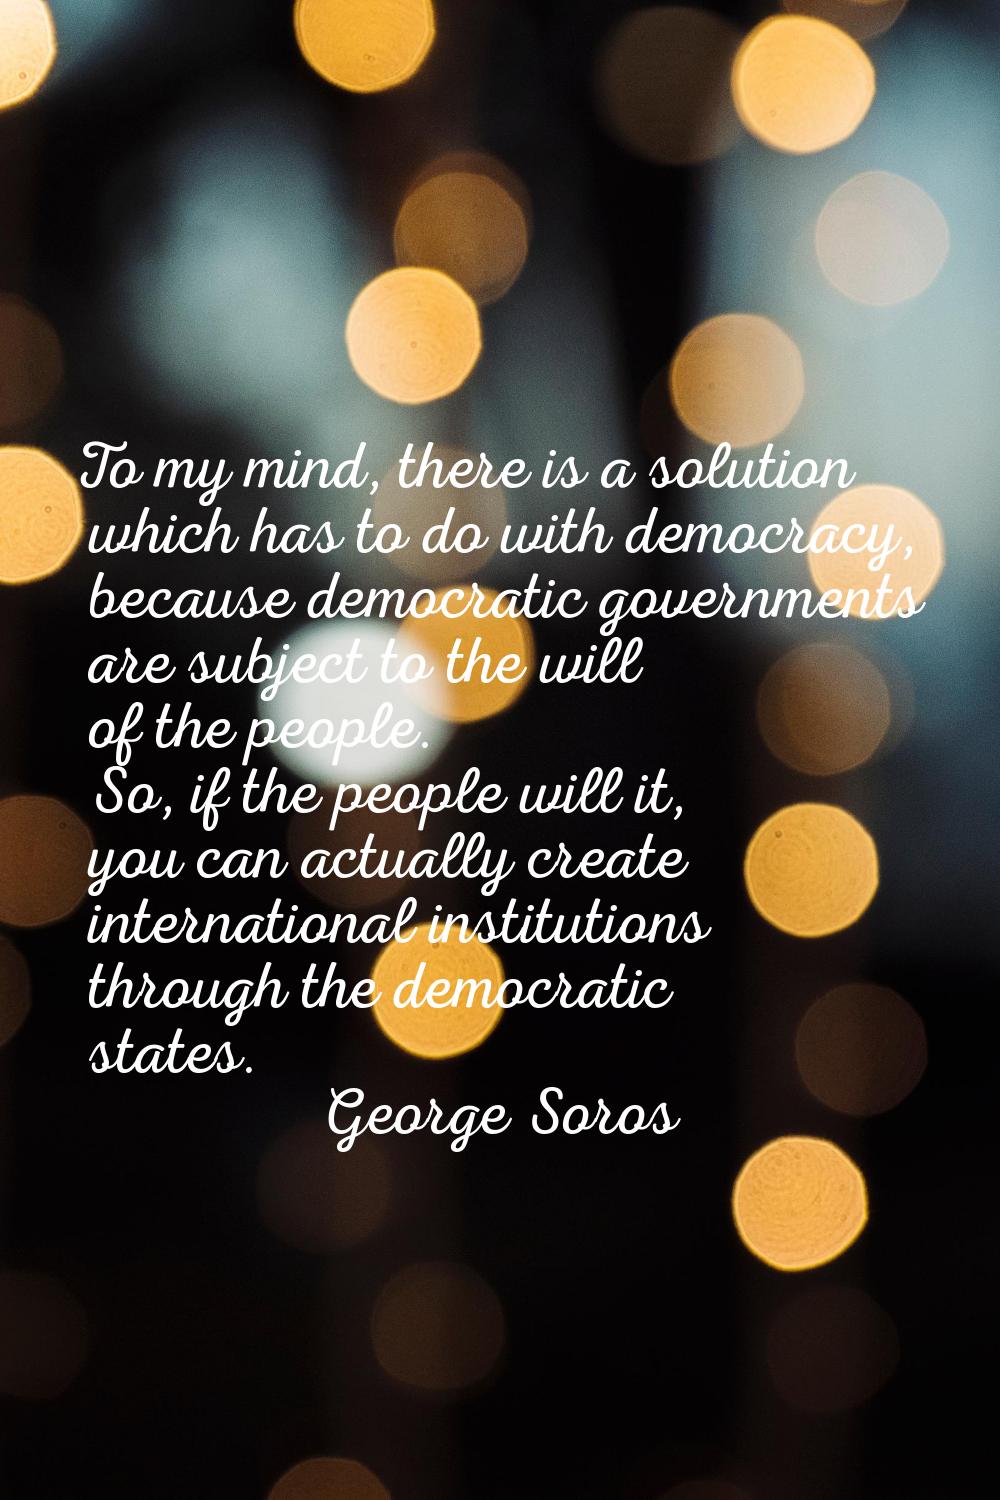 To my mind, there is a solution which has to do with democracy, because democratic governments are 